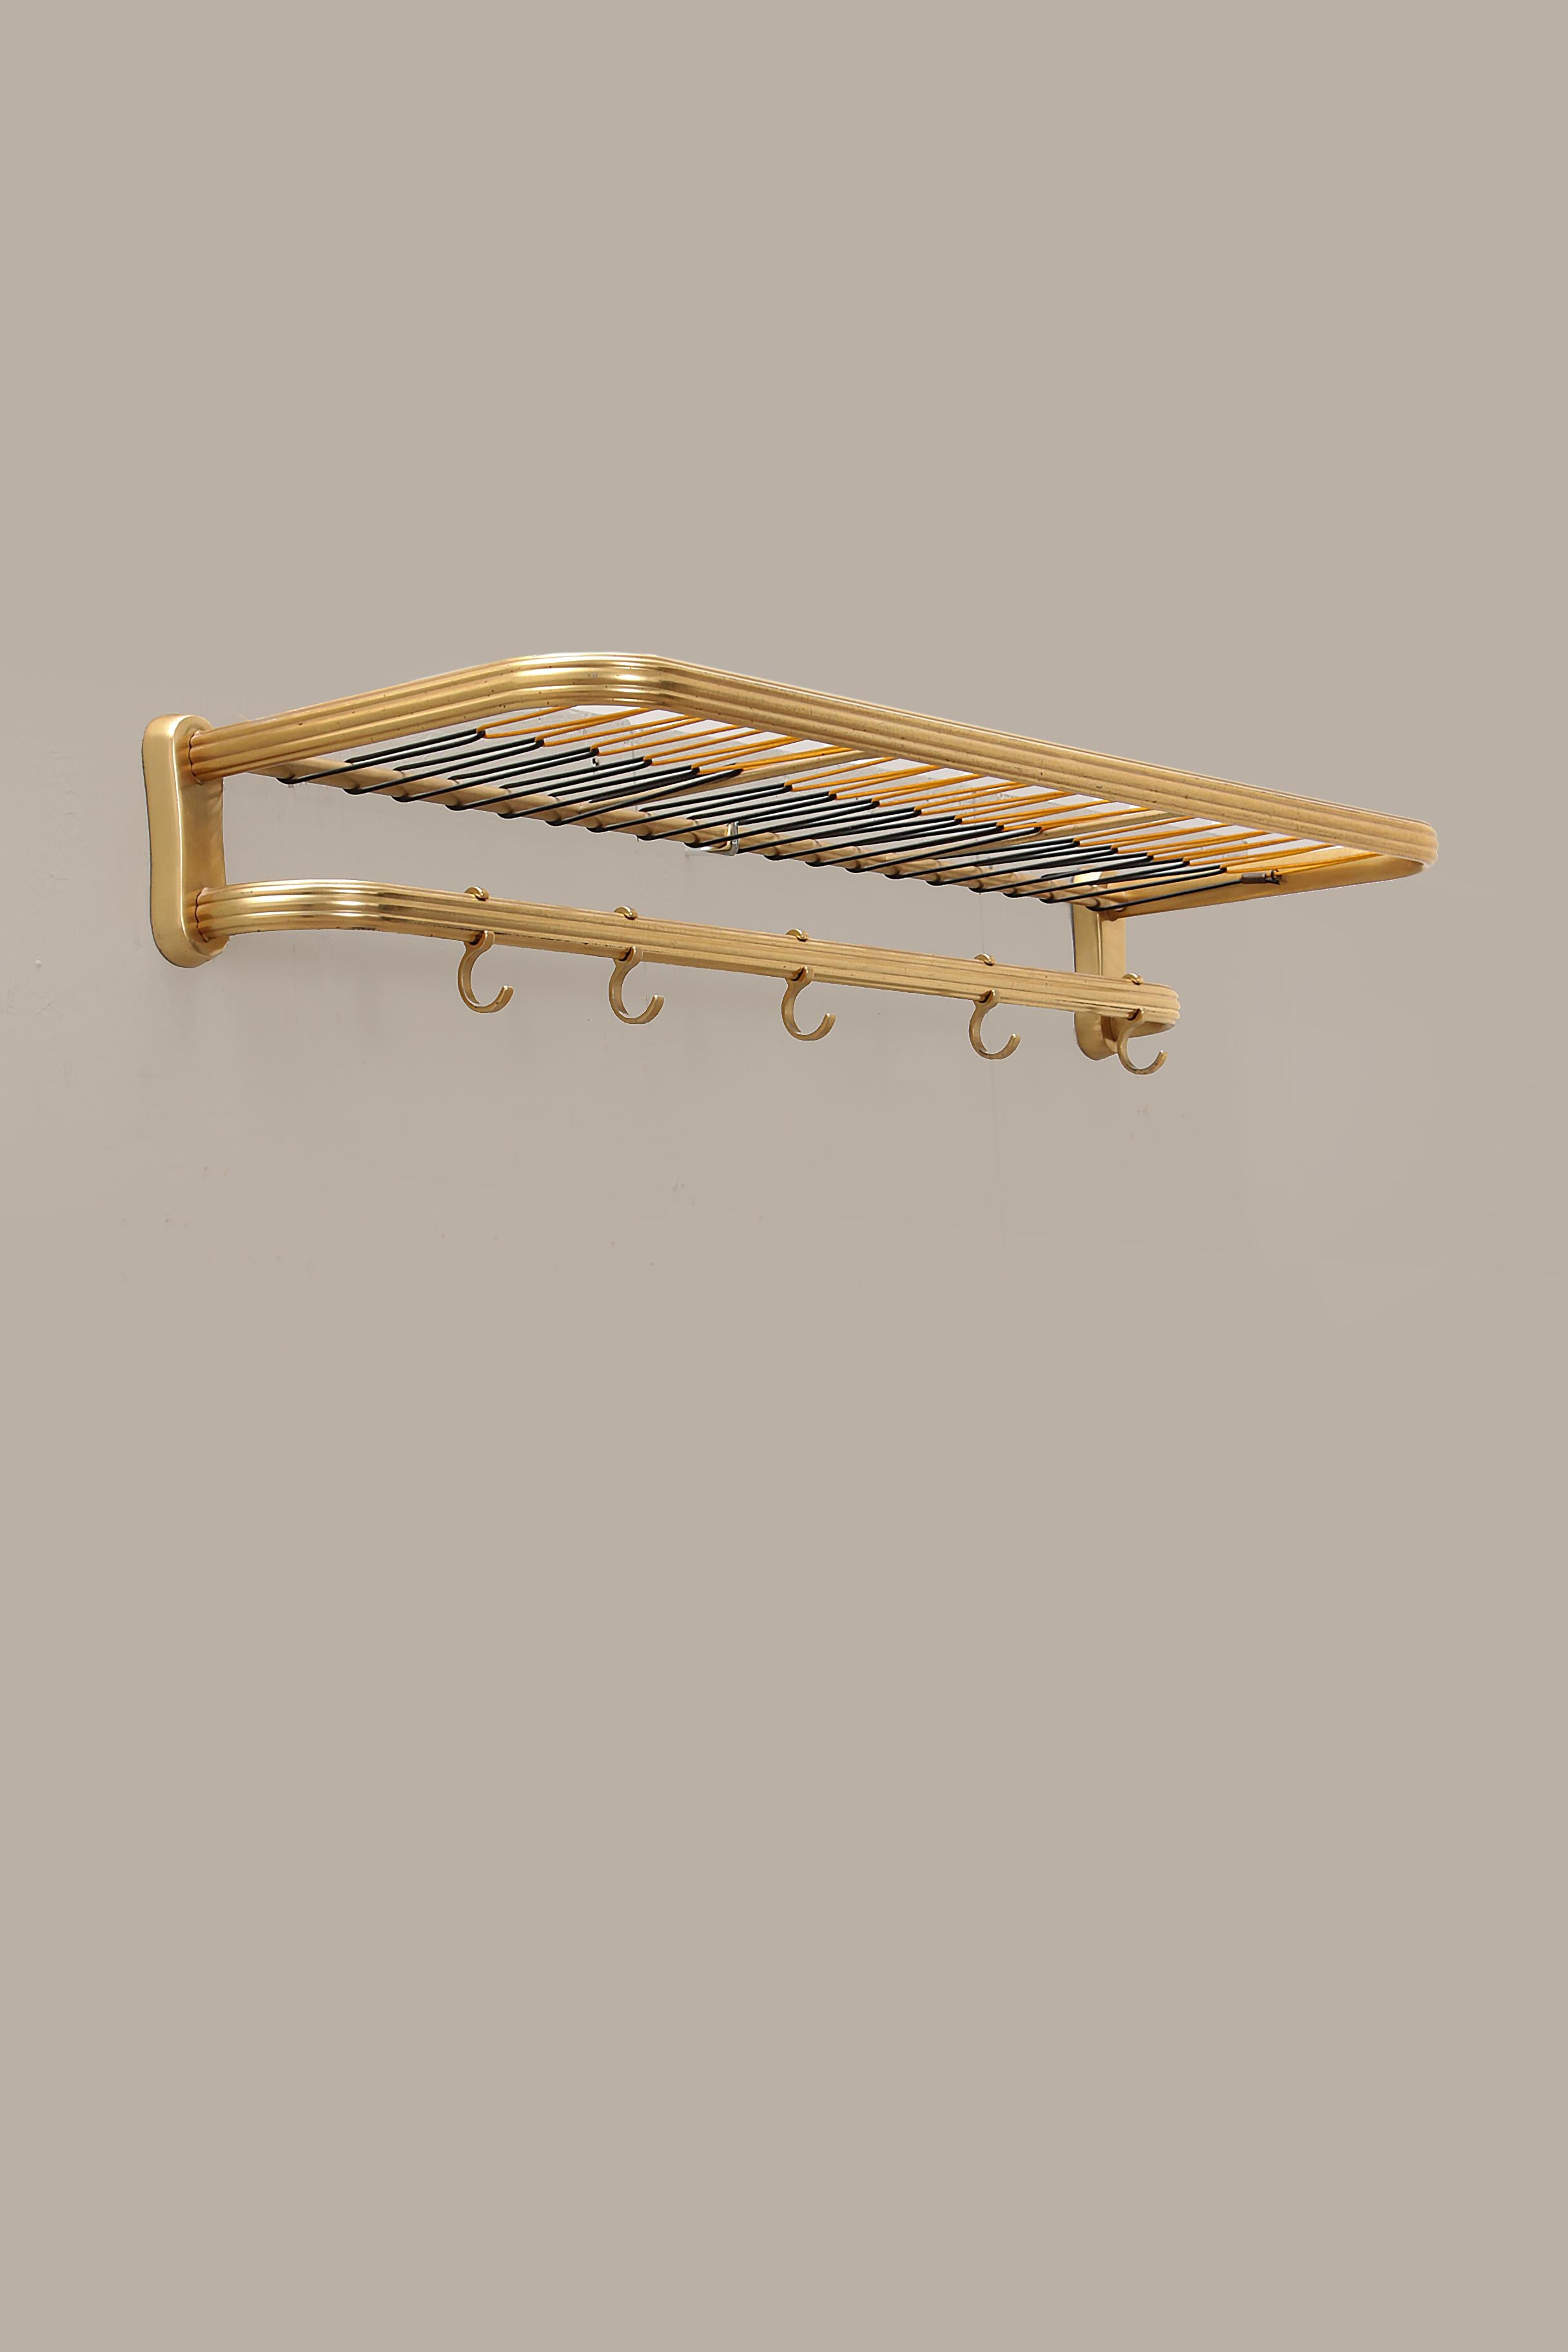 Aluminum gold colored coat rack from Germany.

There is an extra rack under the top rack, with 5 hooks.

Probably made in the 60's now completely hip again.

Beautiful model for your hall or bedroom.

This is a train model with beautiful